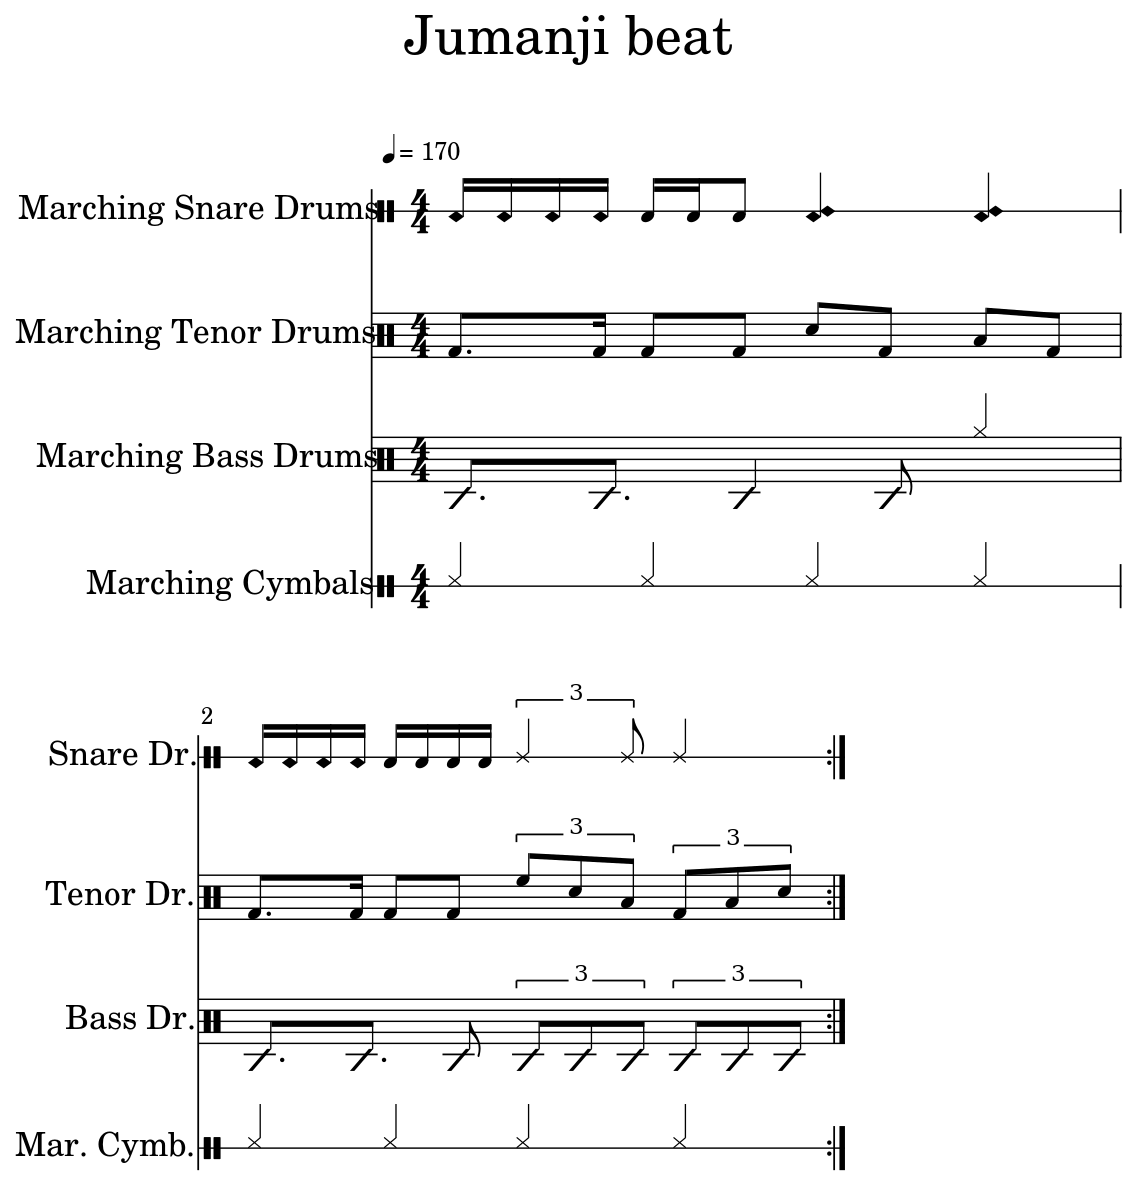 Jumanji beat - Sheet music for Marching Snare Drums, Marching Tenor ...